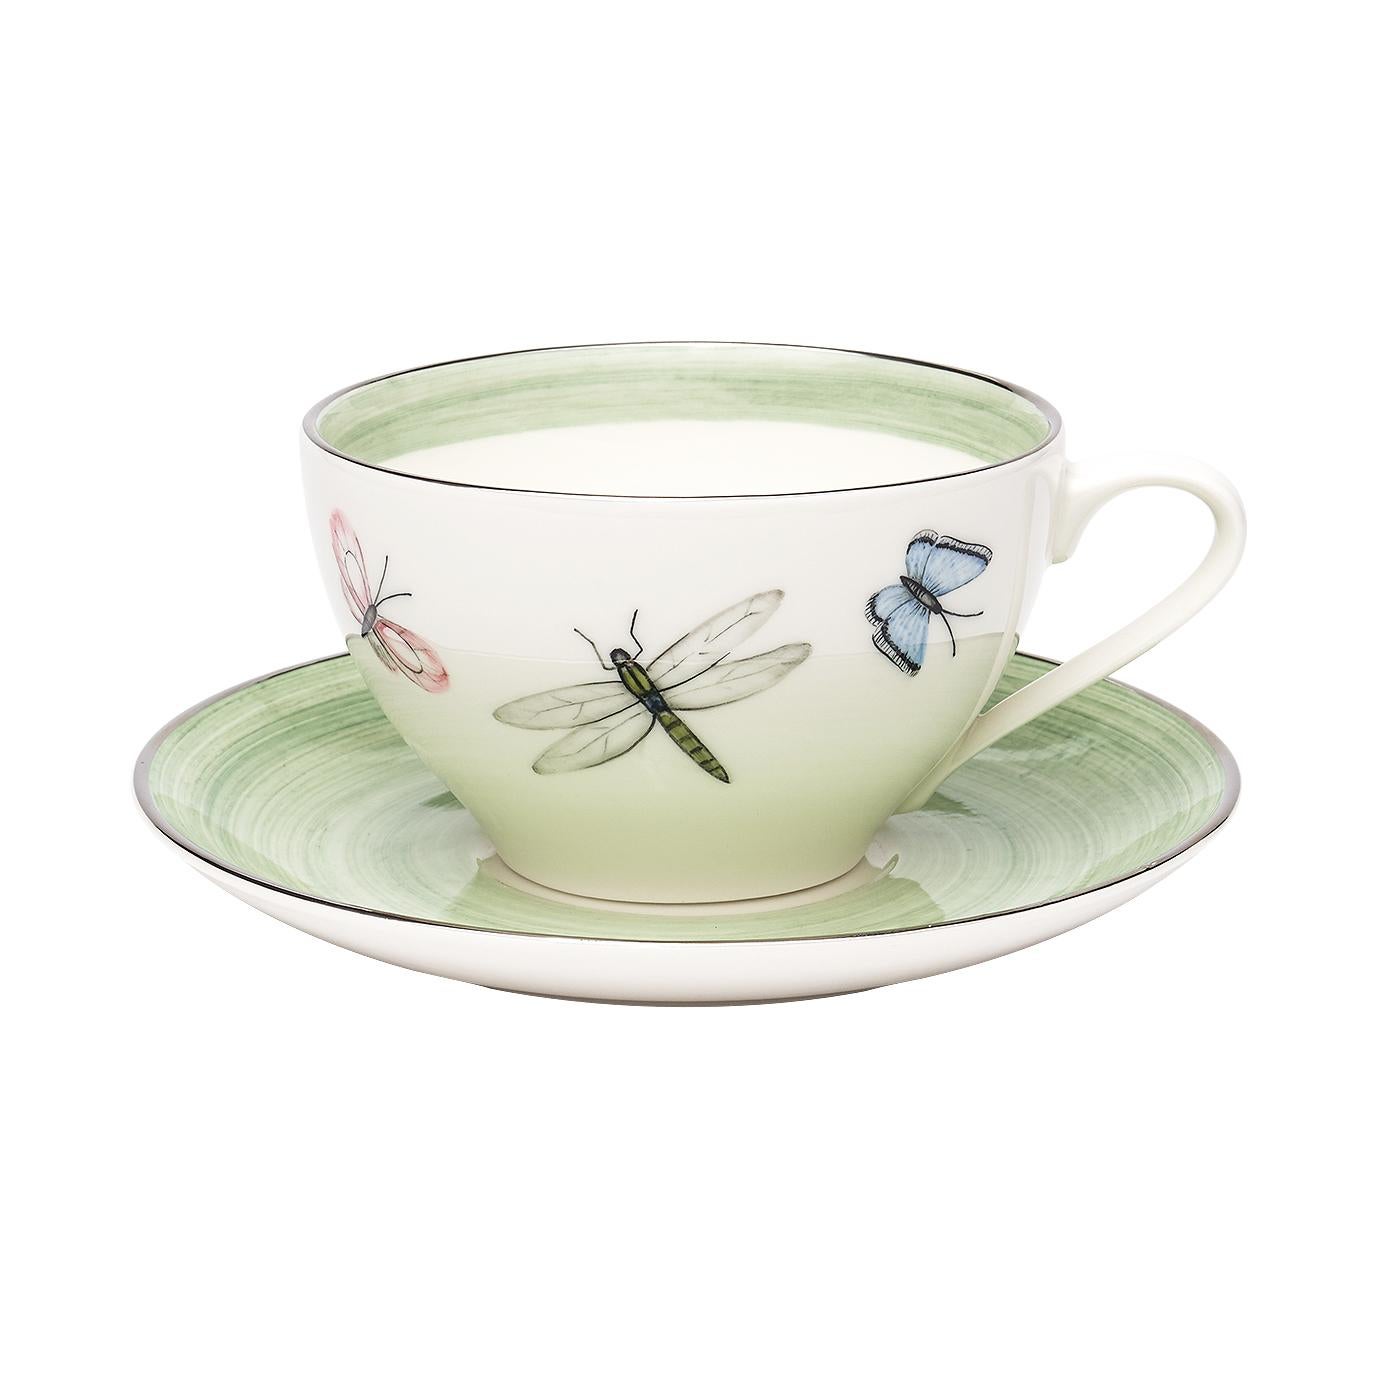 These completely handturned porcelain cups with saucers are hands-free painted in modern decor with butterflies hand painted all around. Comes as a set in three different painted colors. Colors can be mixed within the set.
Rimmed with a platinum